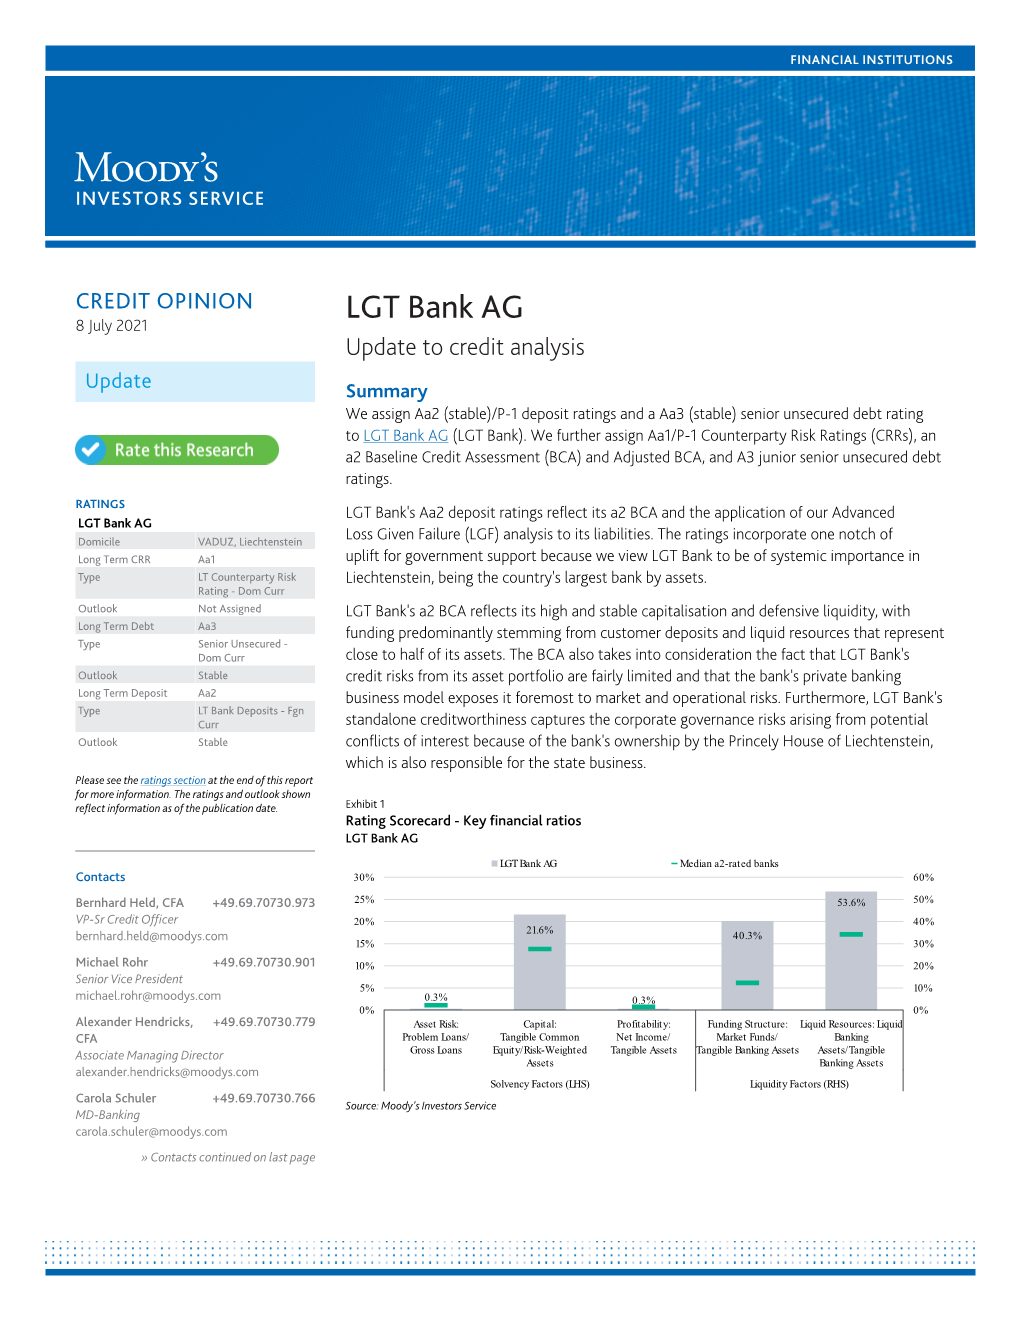 LGT Bank AG 8 July 2021 Update to Credit Analysis